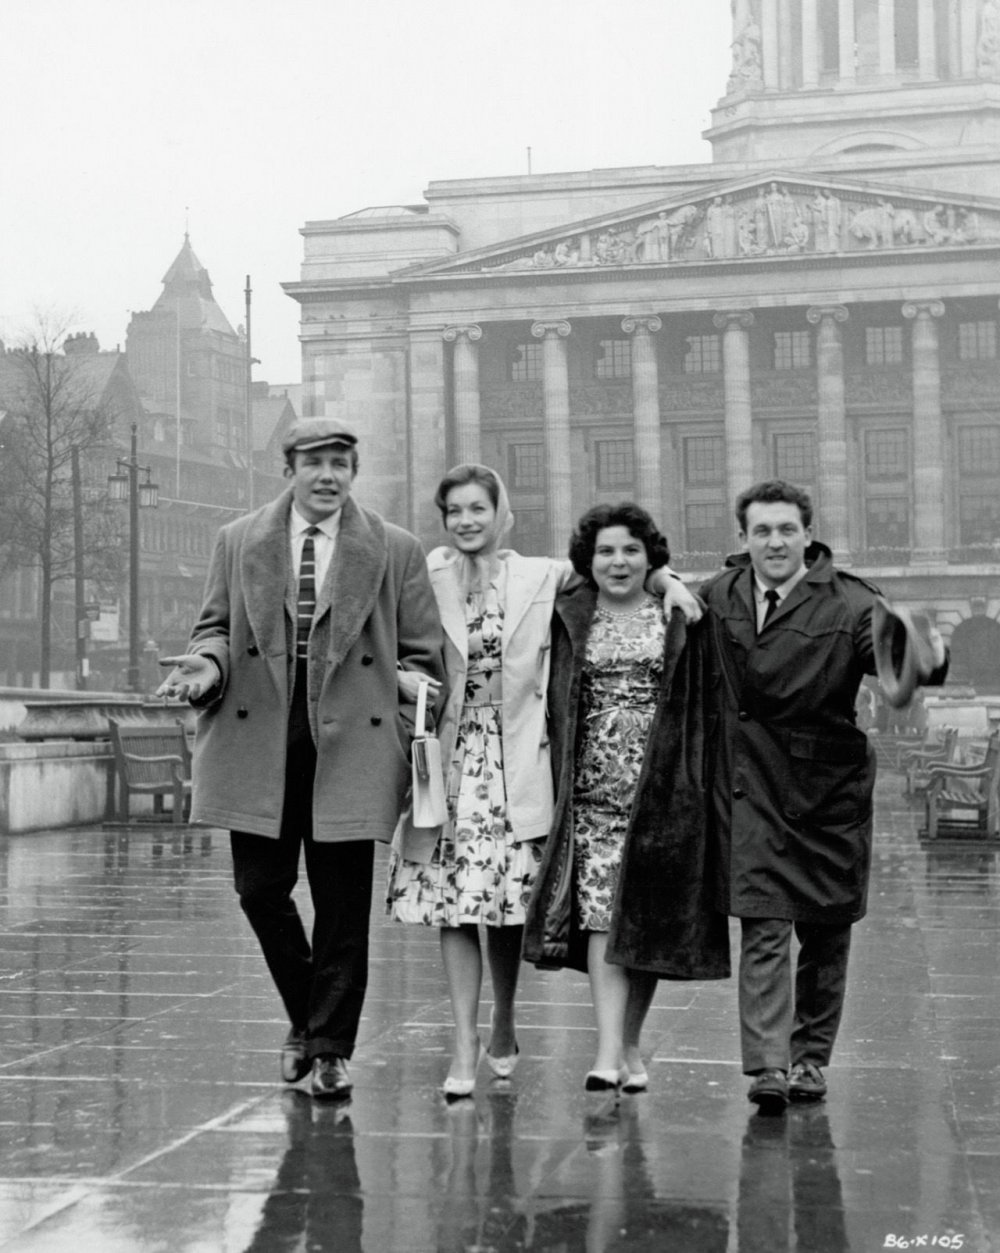 The cast of Saturday Night and Sunday Morning &amp;ndash; Albert Finney, Shirley Anne Field, Louise Dunn and Norman Rossington &amp;ndash; in Market Square, Nottingham